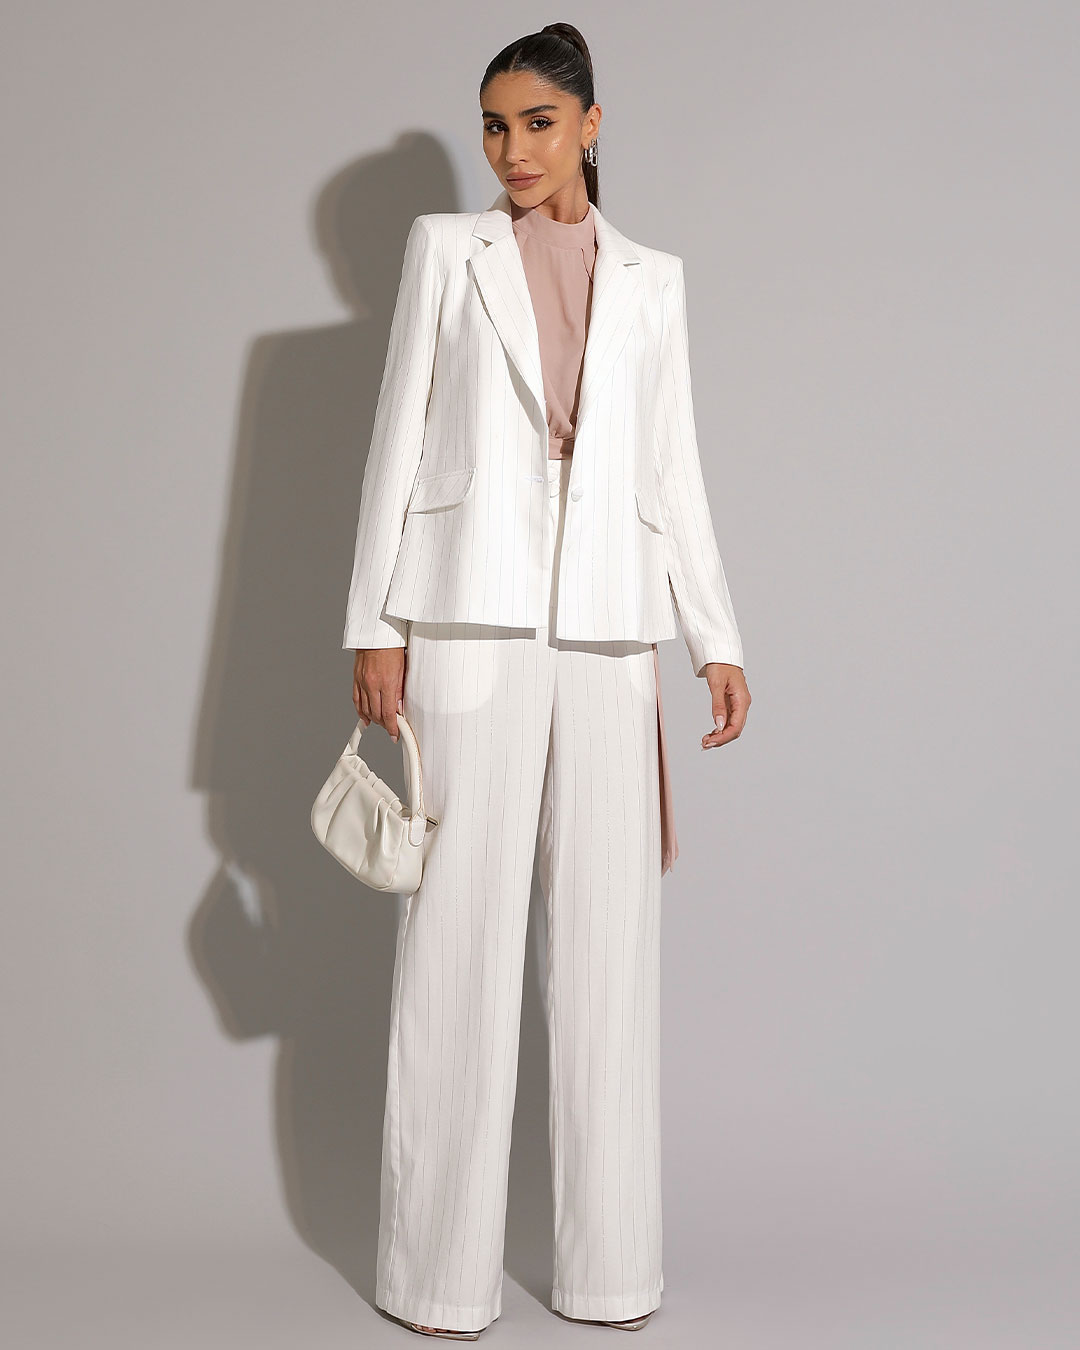 Miss Misses - Miss Misses Lurex Blazer With Shoulder Pads and Off White Button - 54219030